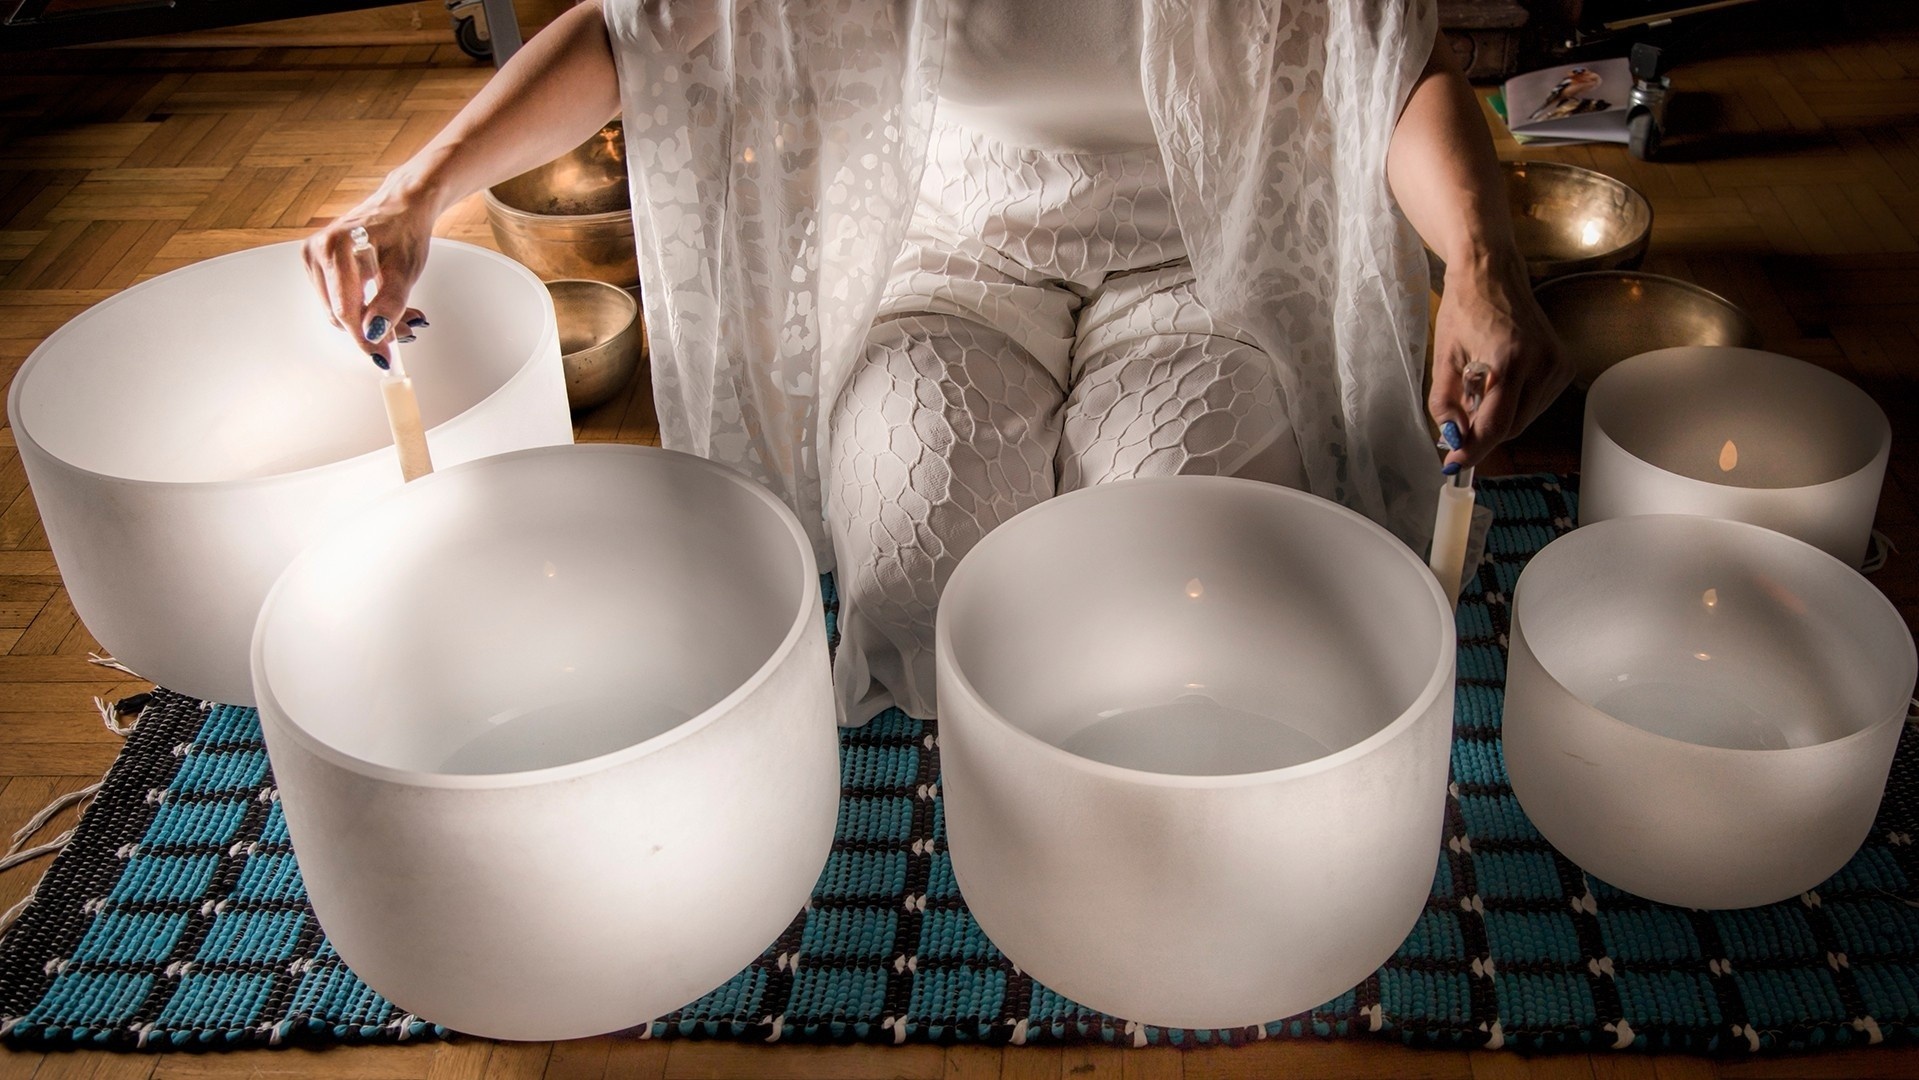 Four pack of Sound Bath & Stress Relief Meditation Tickets, Sun, Mar 31,  2024 at 4:00 PM